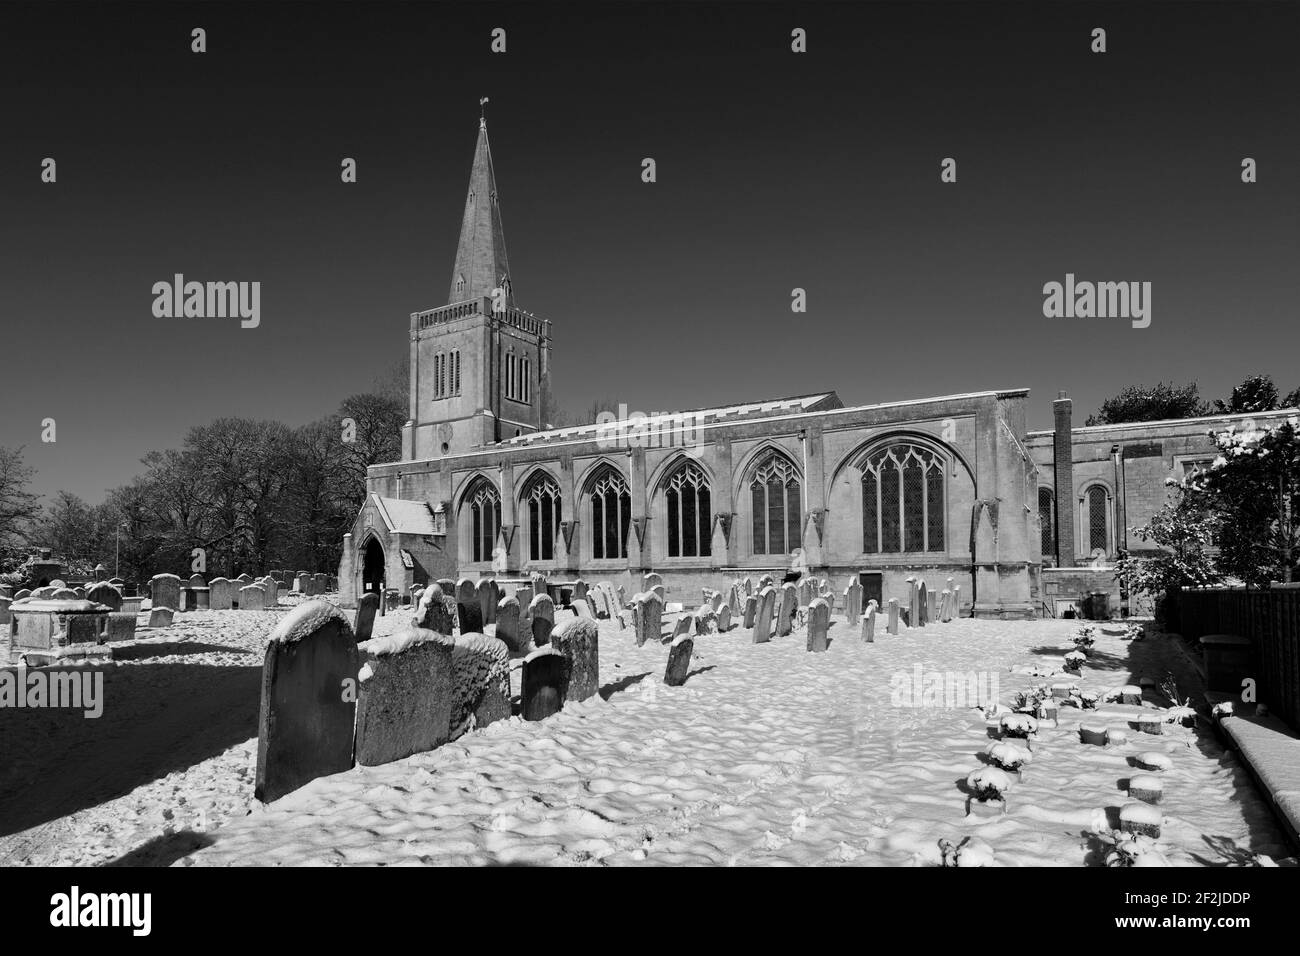 Winter snow over the Priory church, Deeping St James, Lincolnshire County, England, UK Stock Photo